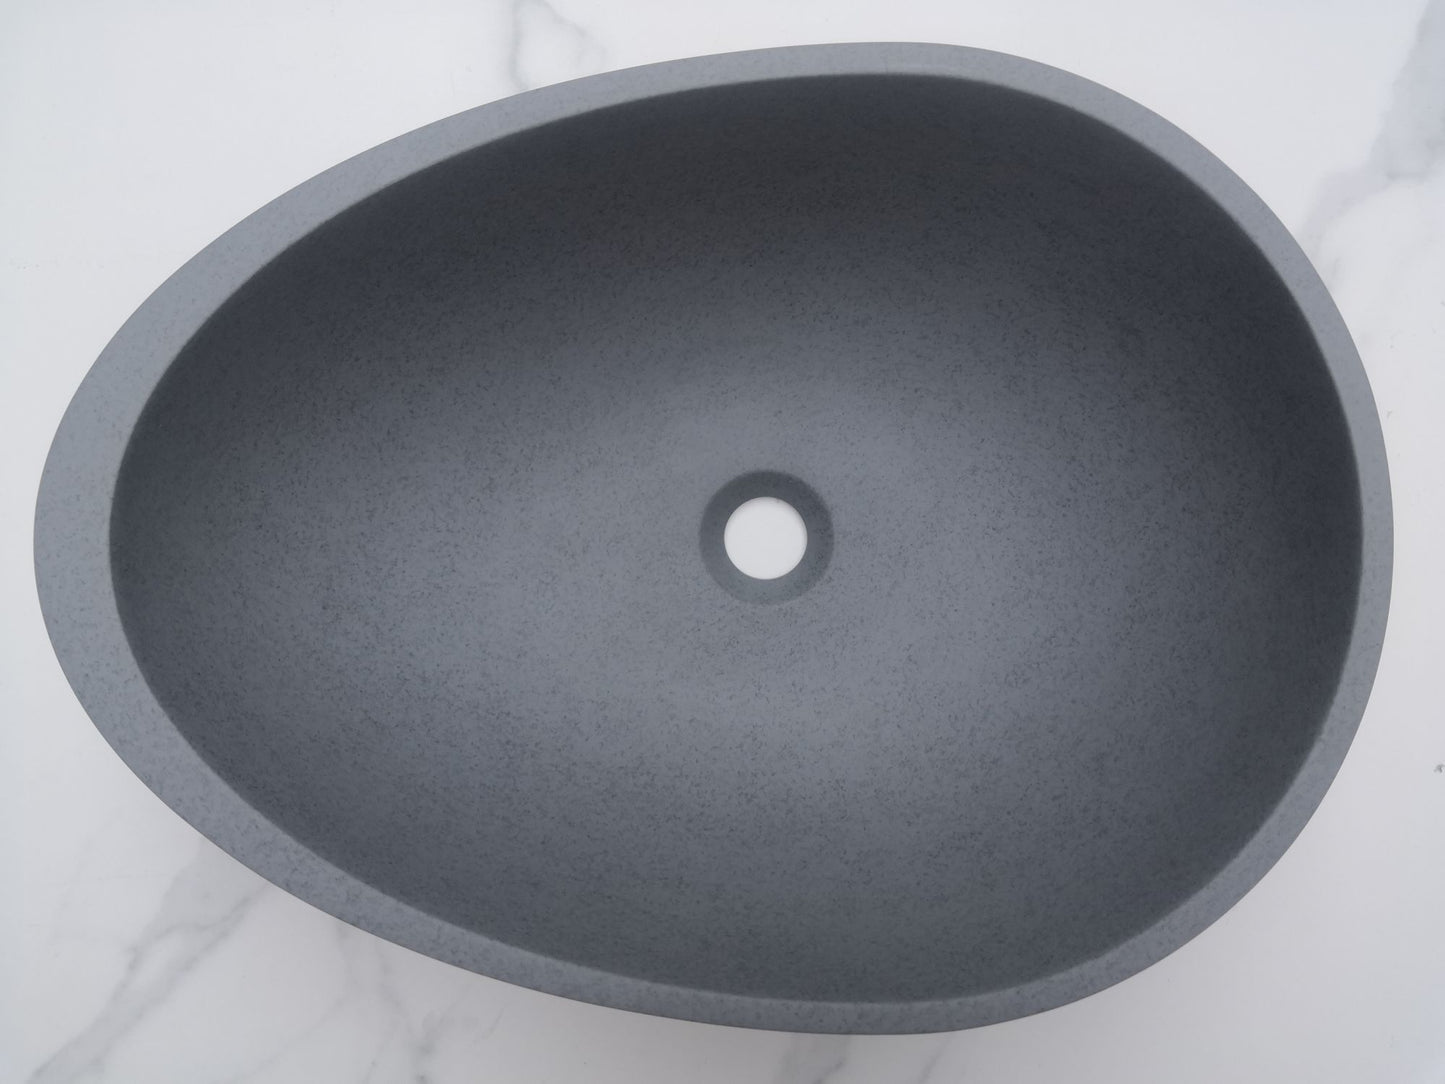 Egg shape Concrete Vessel Bathroom Sink in Grey without Faucet and Drain